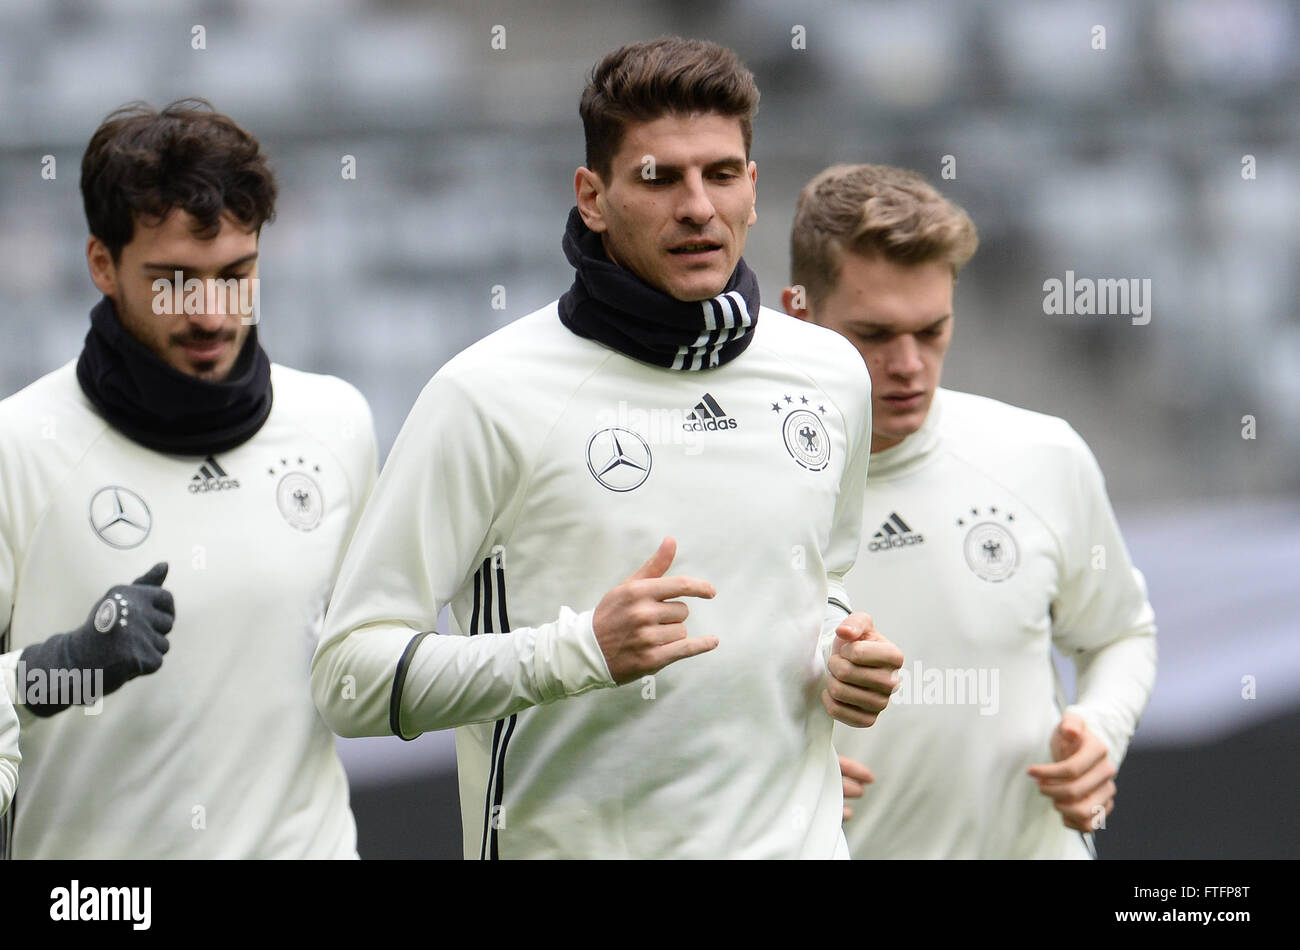 Mats Hummels (l-r), Mario Gomez and Matthias Ginter of the German national soccer team during the final practice at the Allianz Arena in Munich, Germany, 28 March 2016. Germany meets Italy in a try-out match on 29 March 2016. PHOTO: ANDREAS GEBERT/dpa Stock Photo